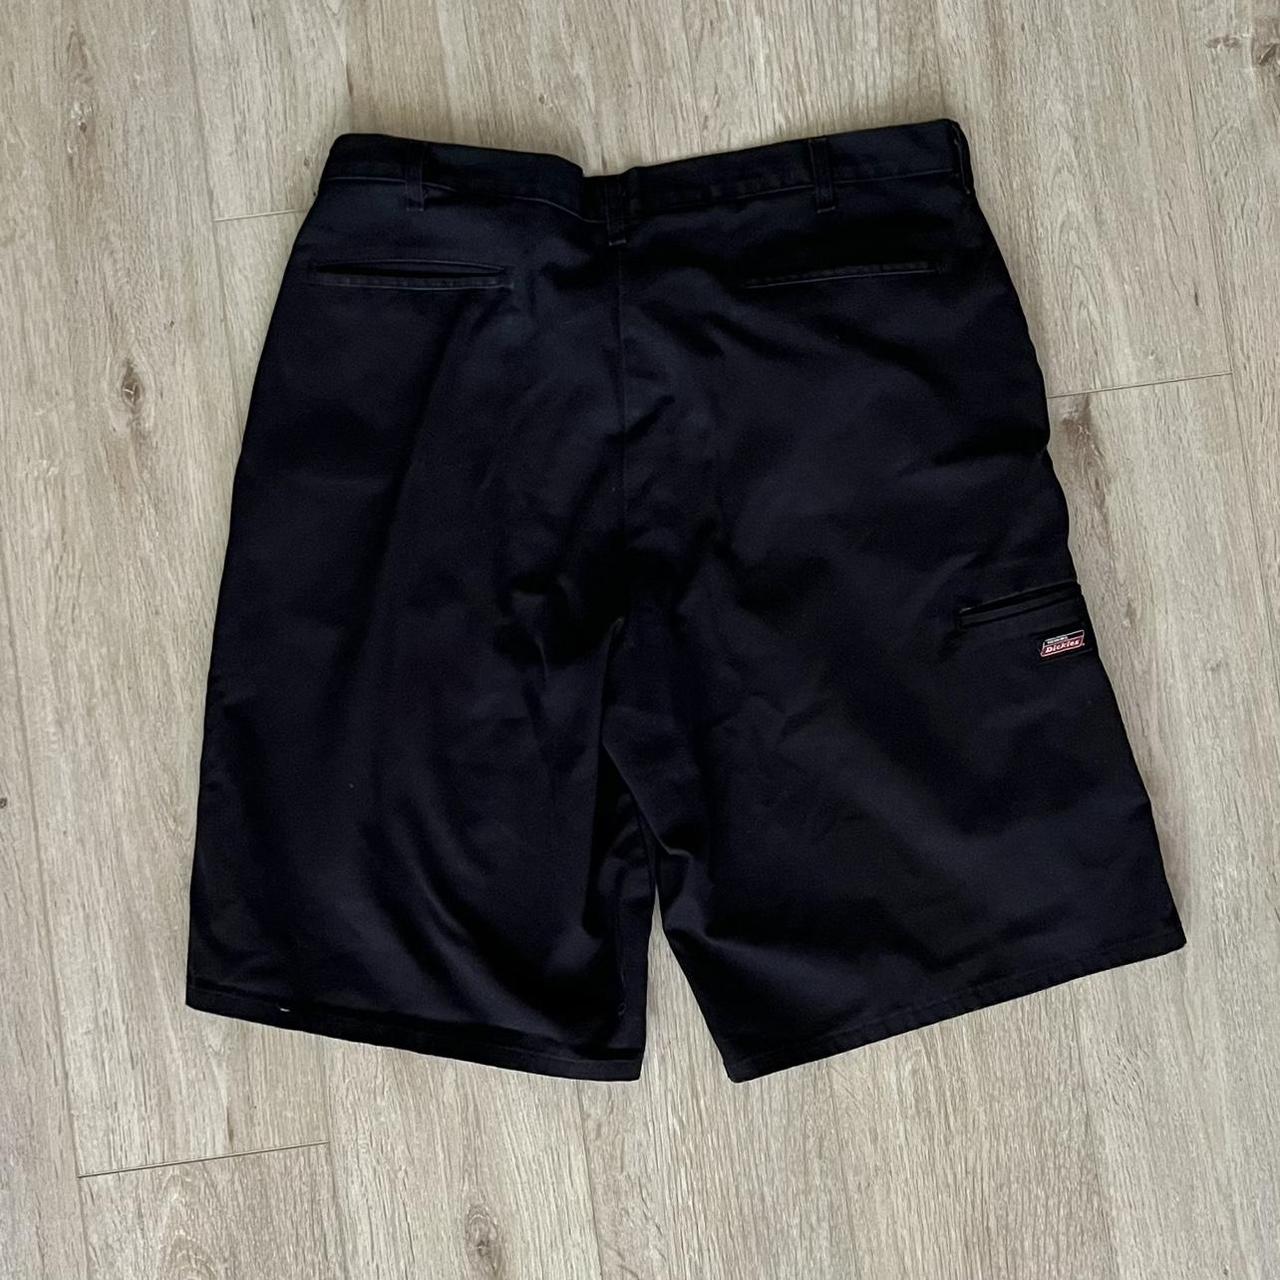 Black Dickies work shorts size 39 or 40 These shorts... - Depop